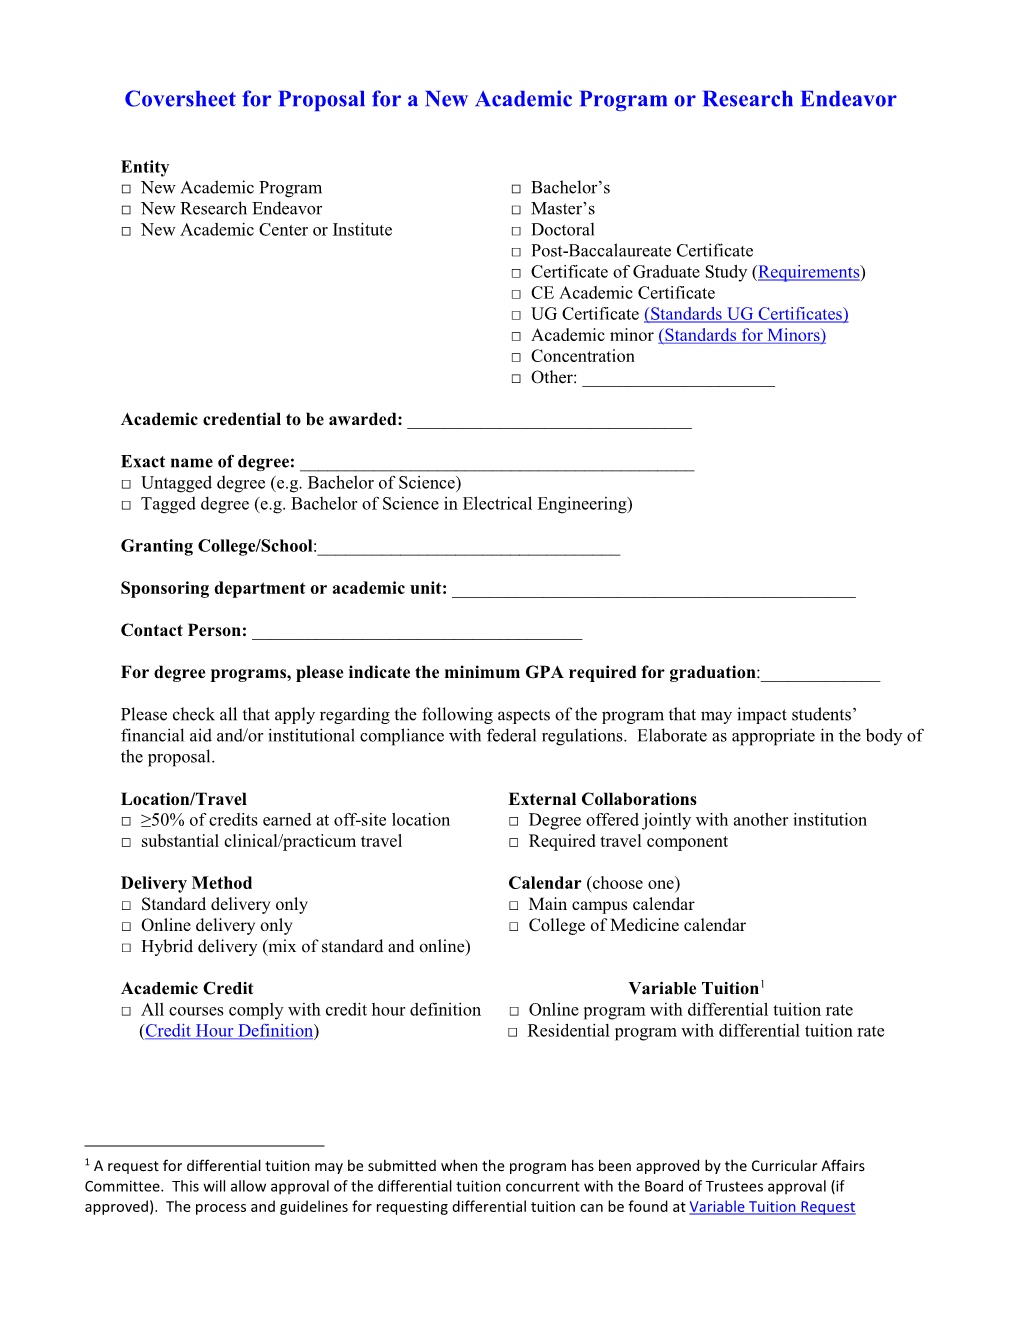 Coversheet for Proposal for a New Academic Program Or Research Endeavor